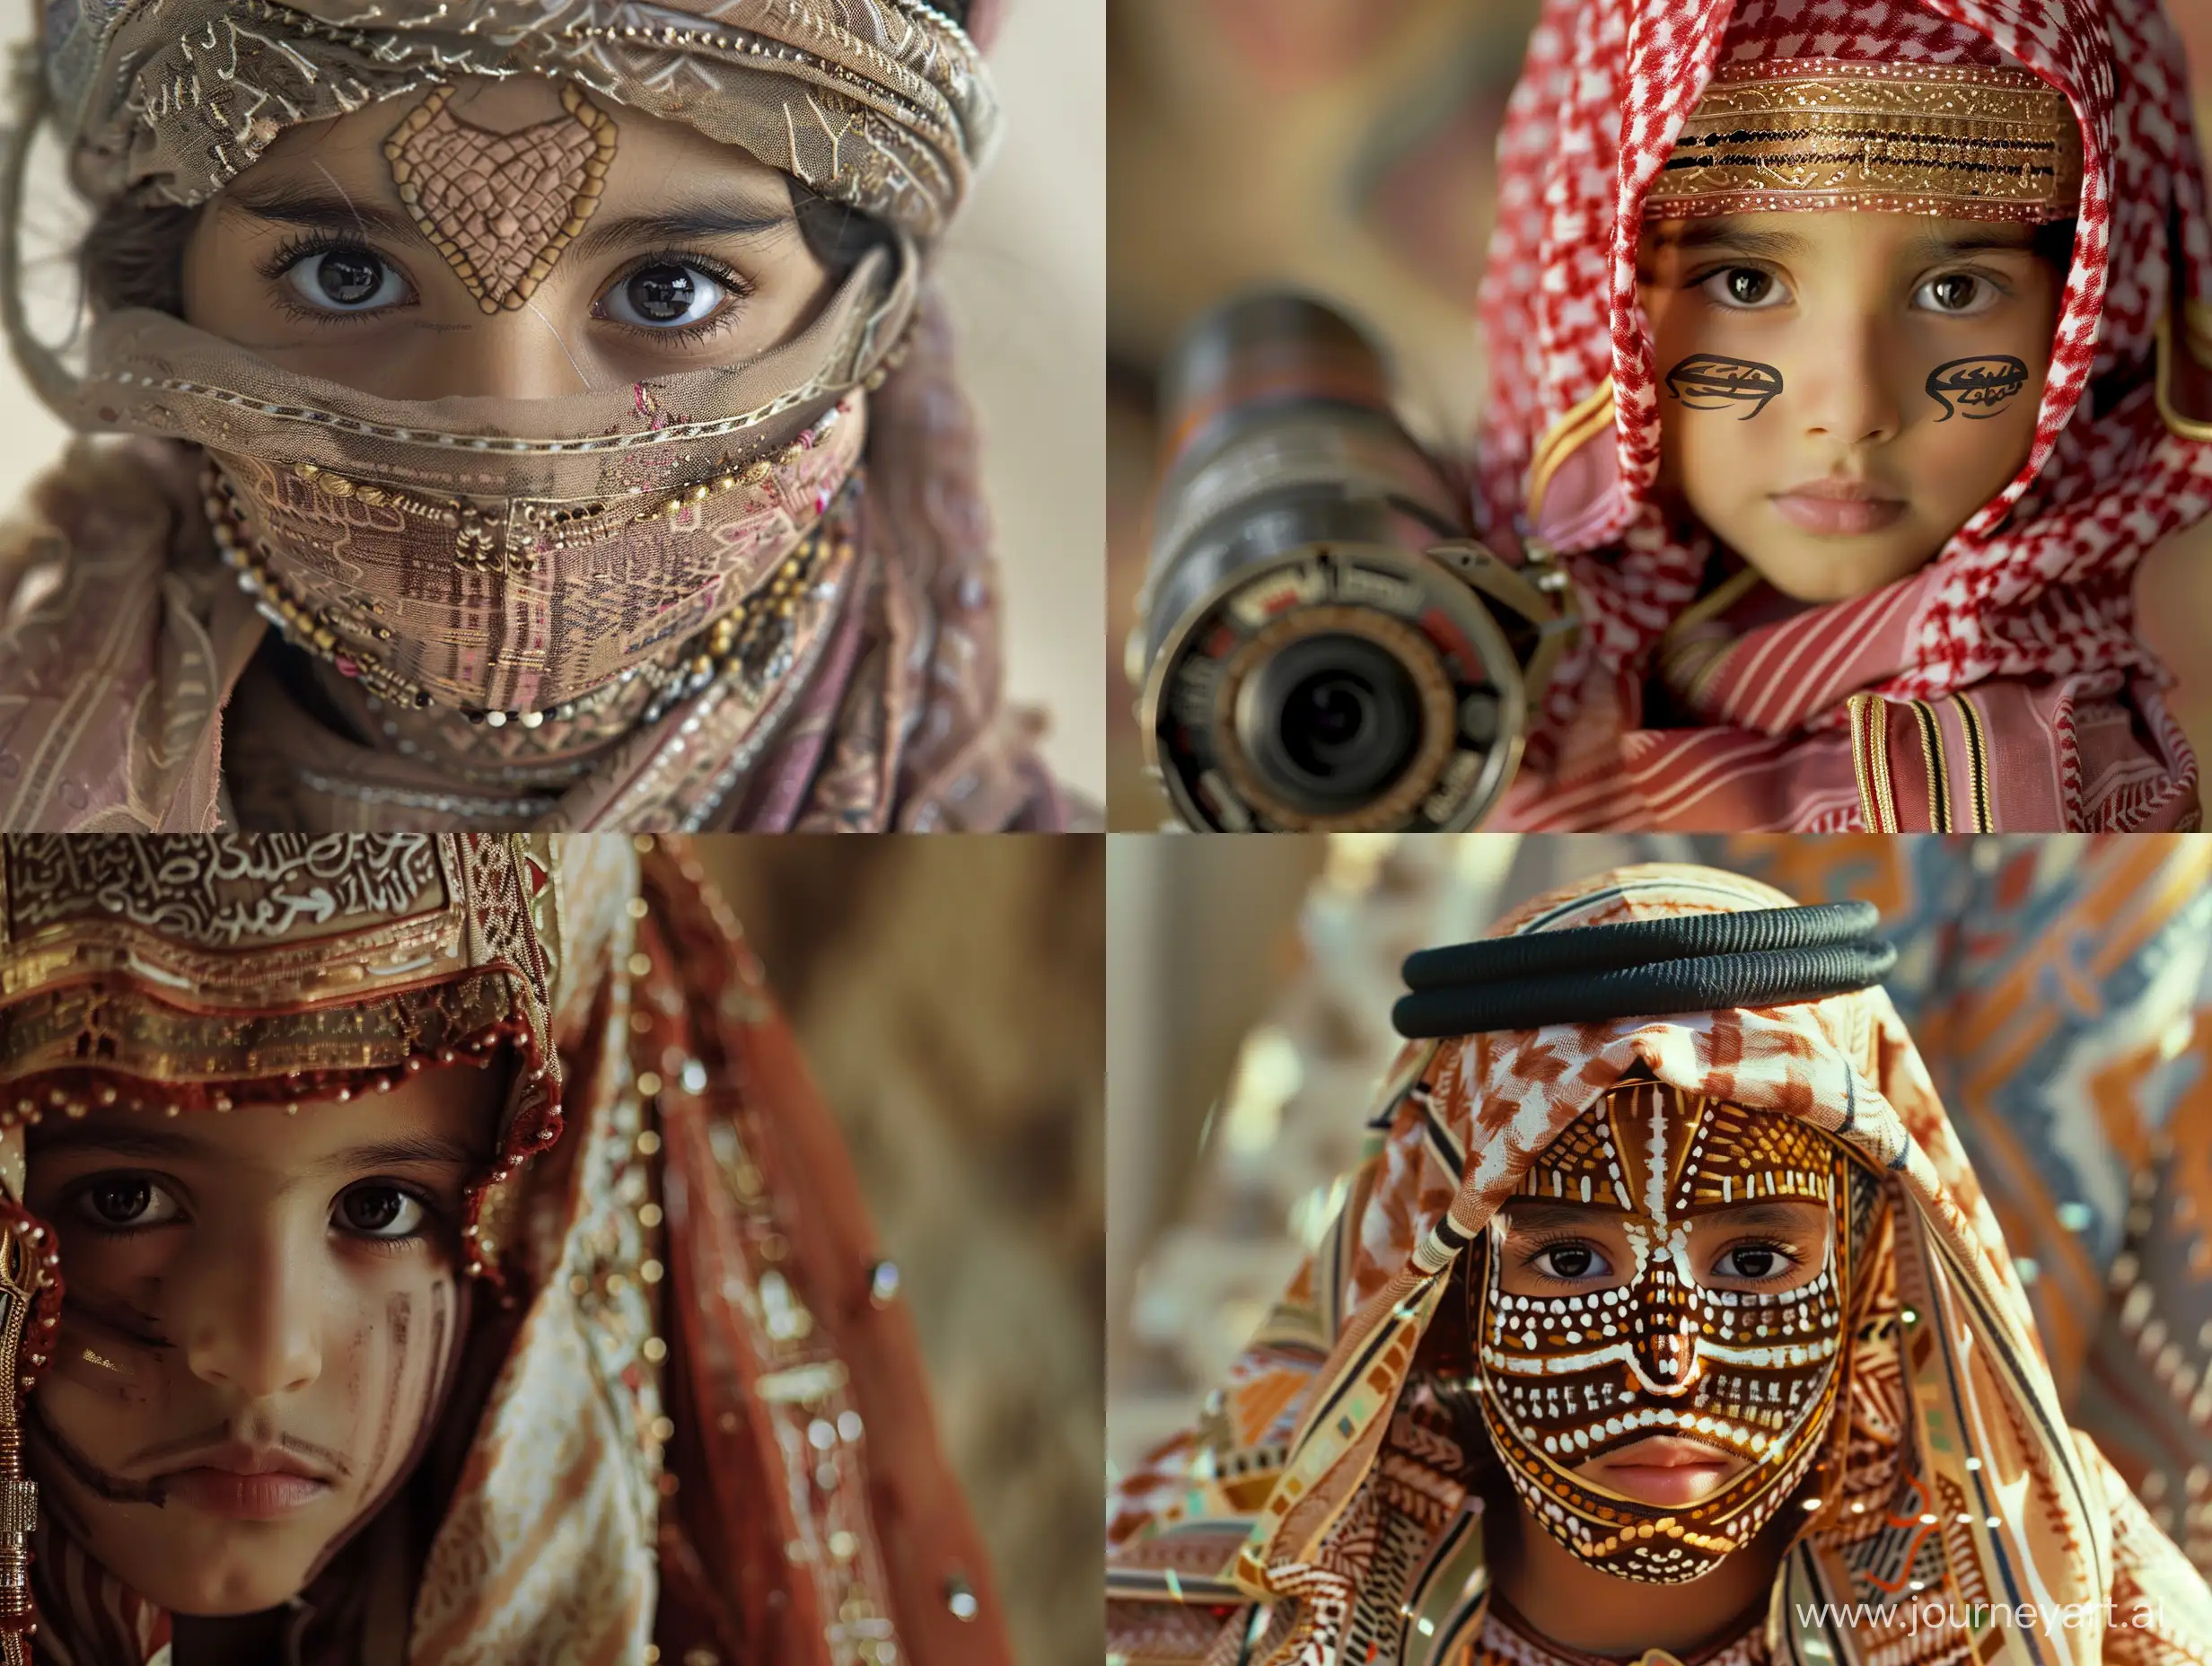 Captivating-Portrait-of-a-Saudi-Child-in-Traditional-Attire-with-Artistic-Cinematography